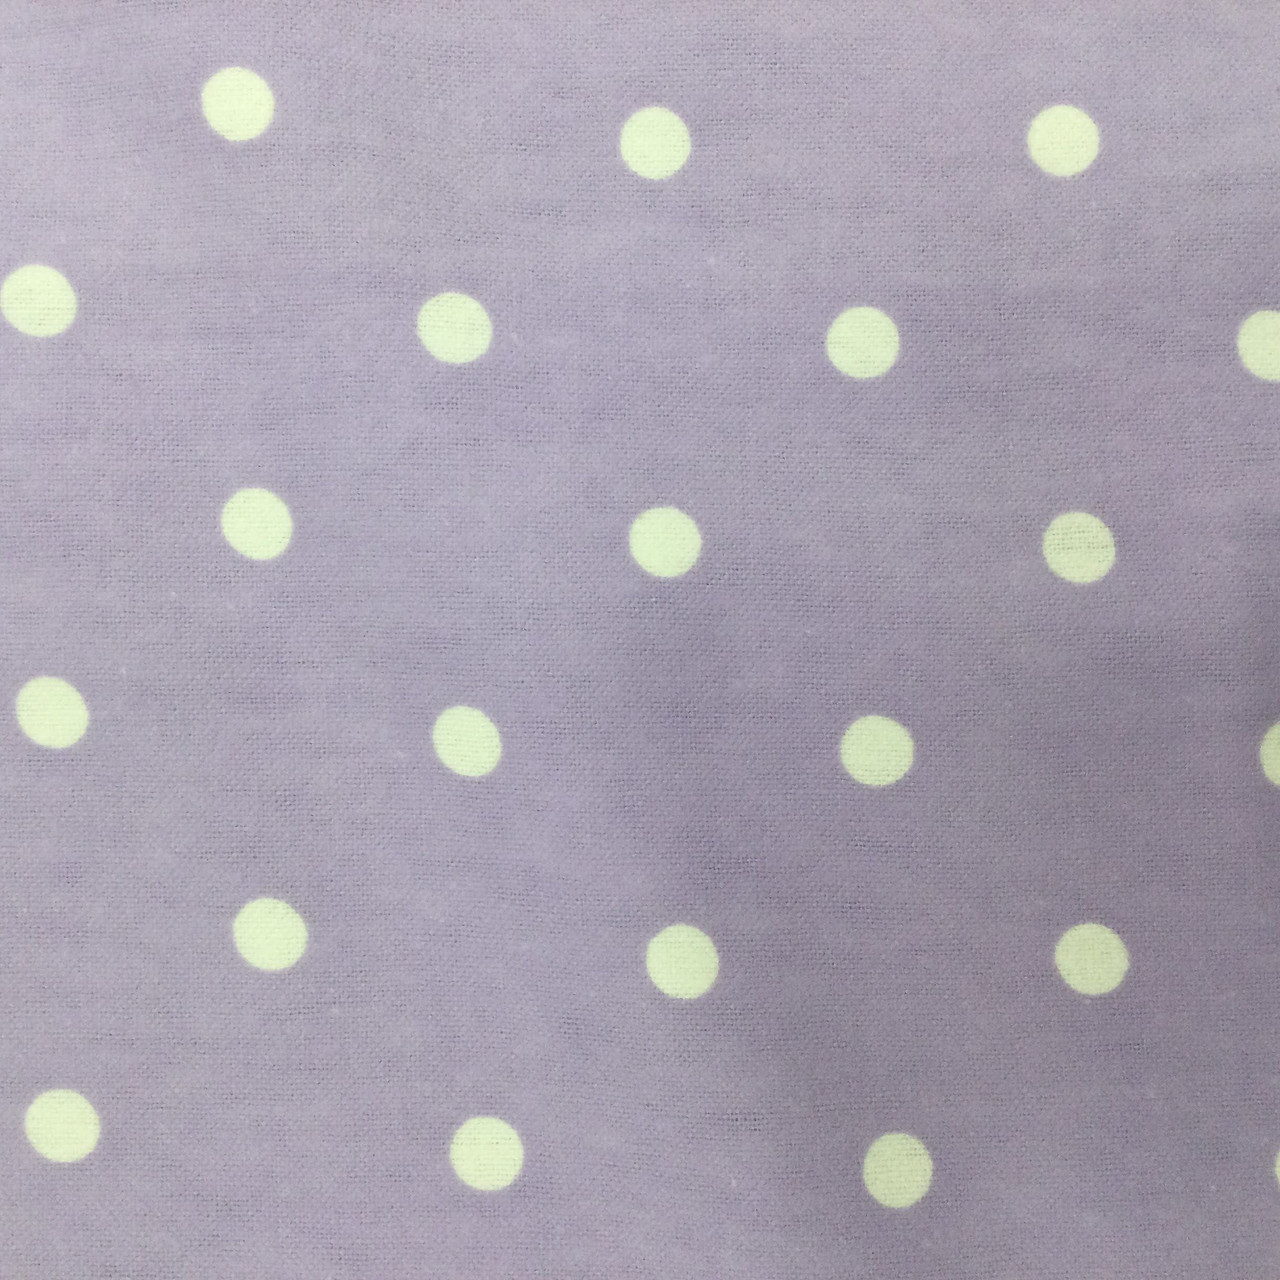 Polka Dots in Lavender and White, Flannel Fabric, 44 Wide, 100% Cotton